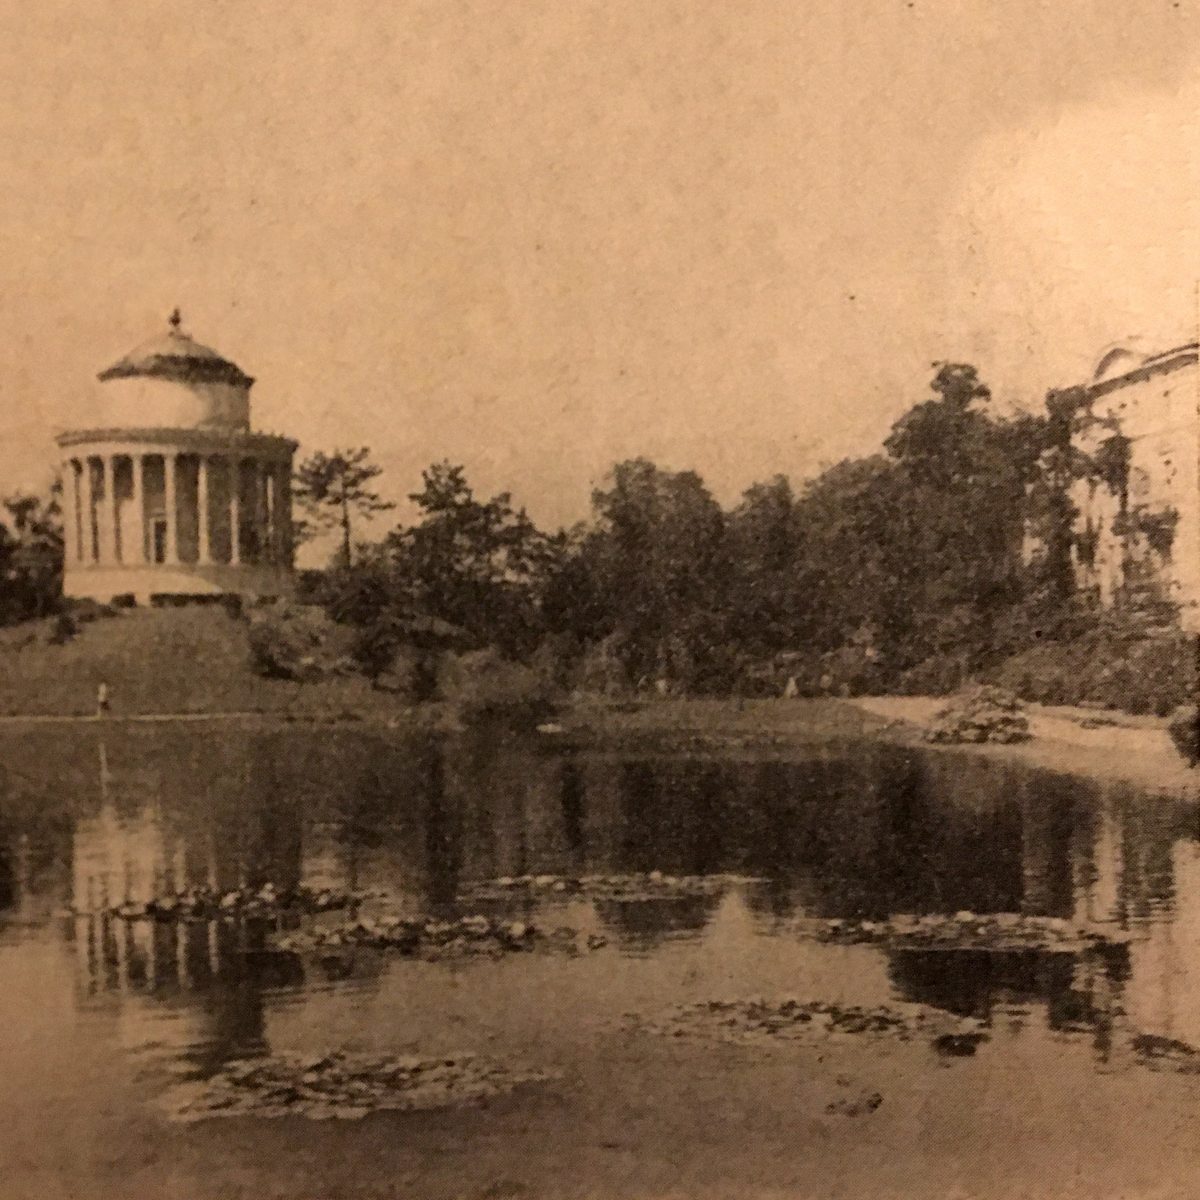 A photograph reproduced in a 1940s textbook.